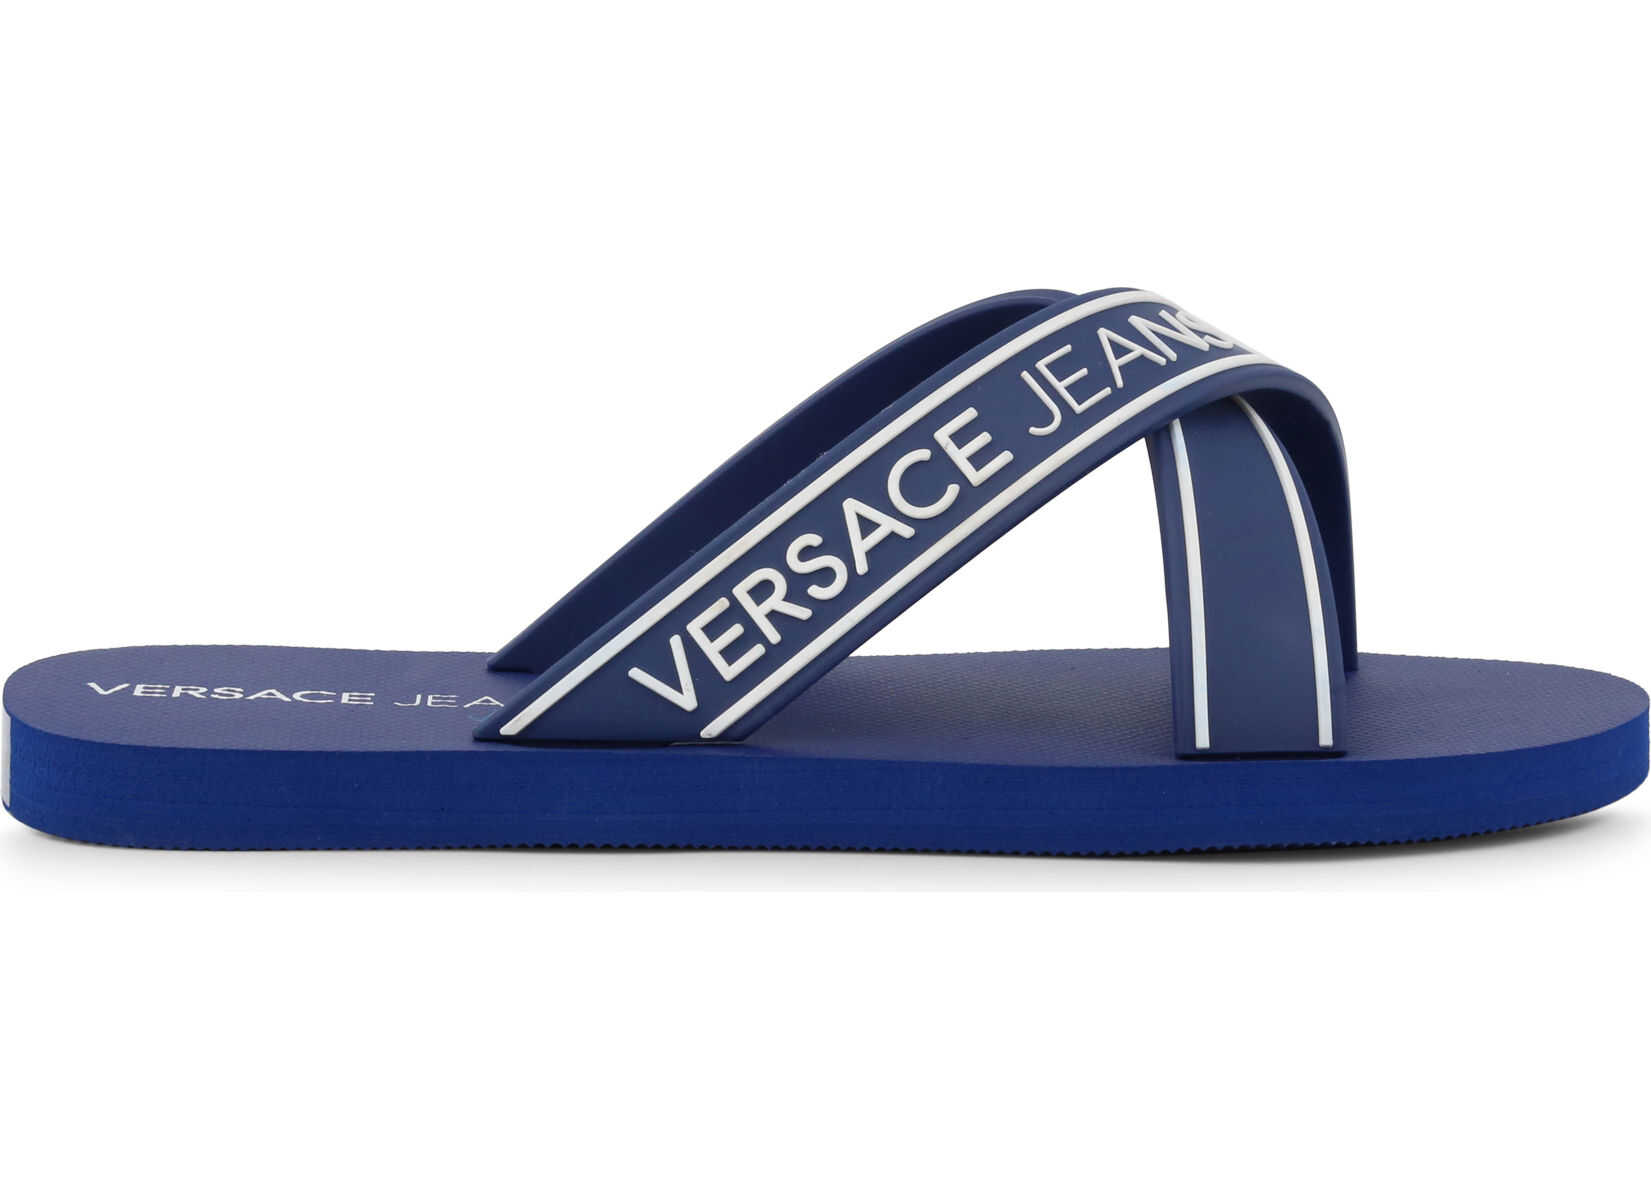 Versace Jeans Ytbsq5 BLUE